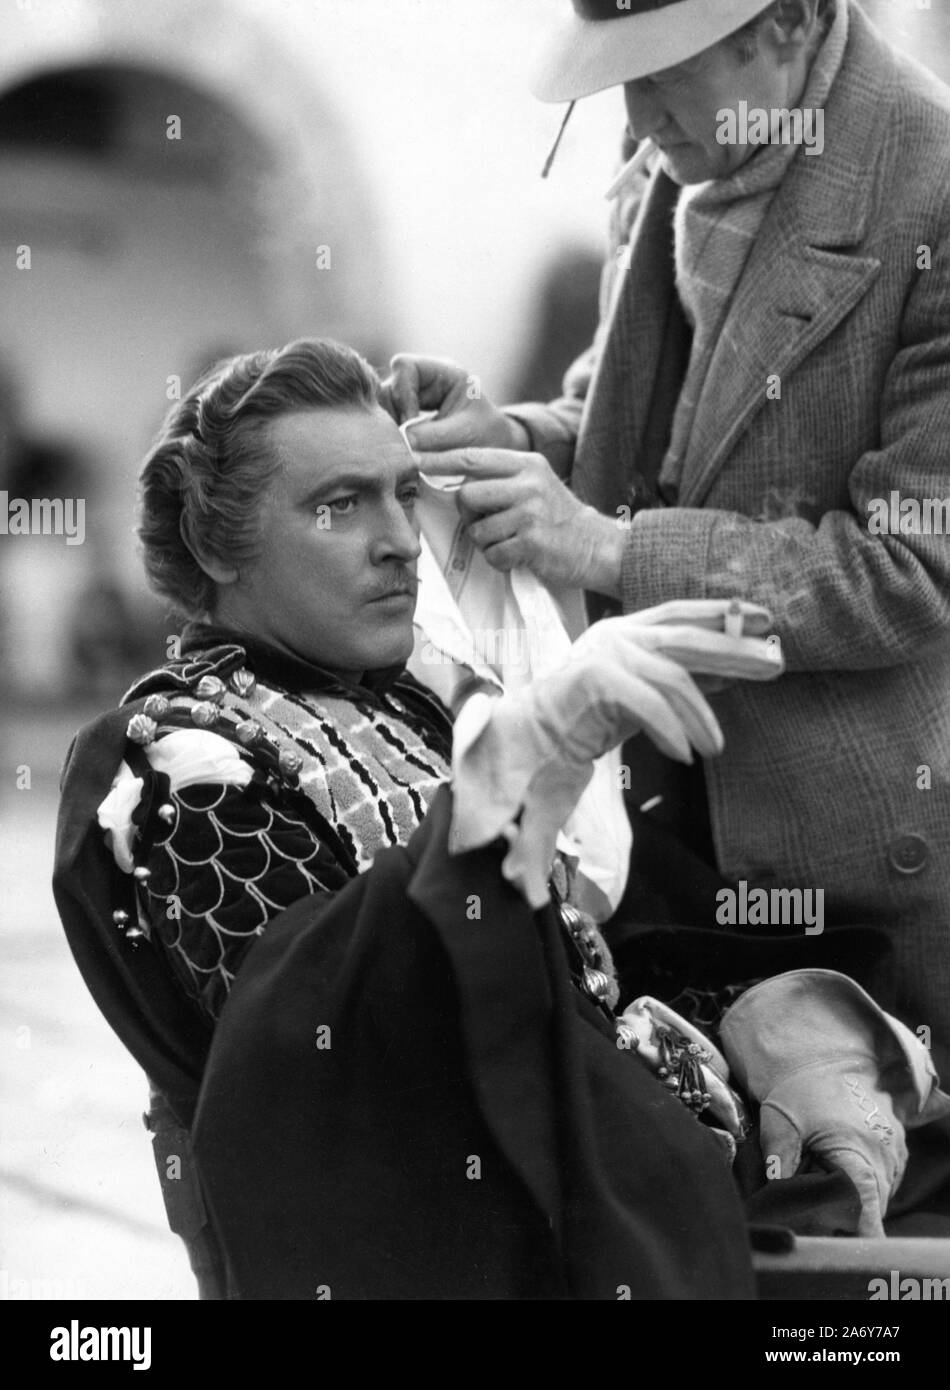 JOHN BARRYMORE in costume as Mercutio on set candid with make-up man during  filming ROMEO AND JULIET 1936 director GEORGE CUKOR play WILLIAM  SHAKESPEARE costumes ADRIAN and OLIVER MESSEL producer IRVING THALBERG